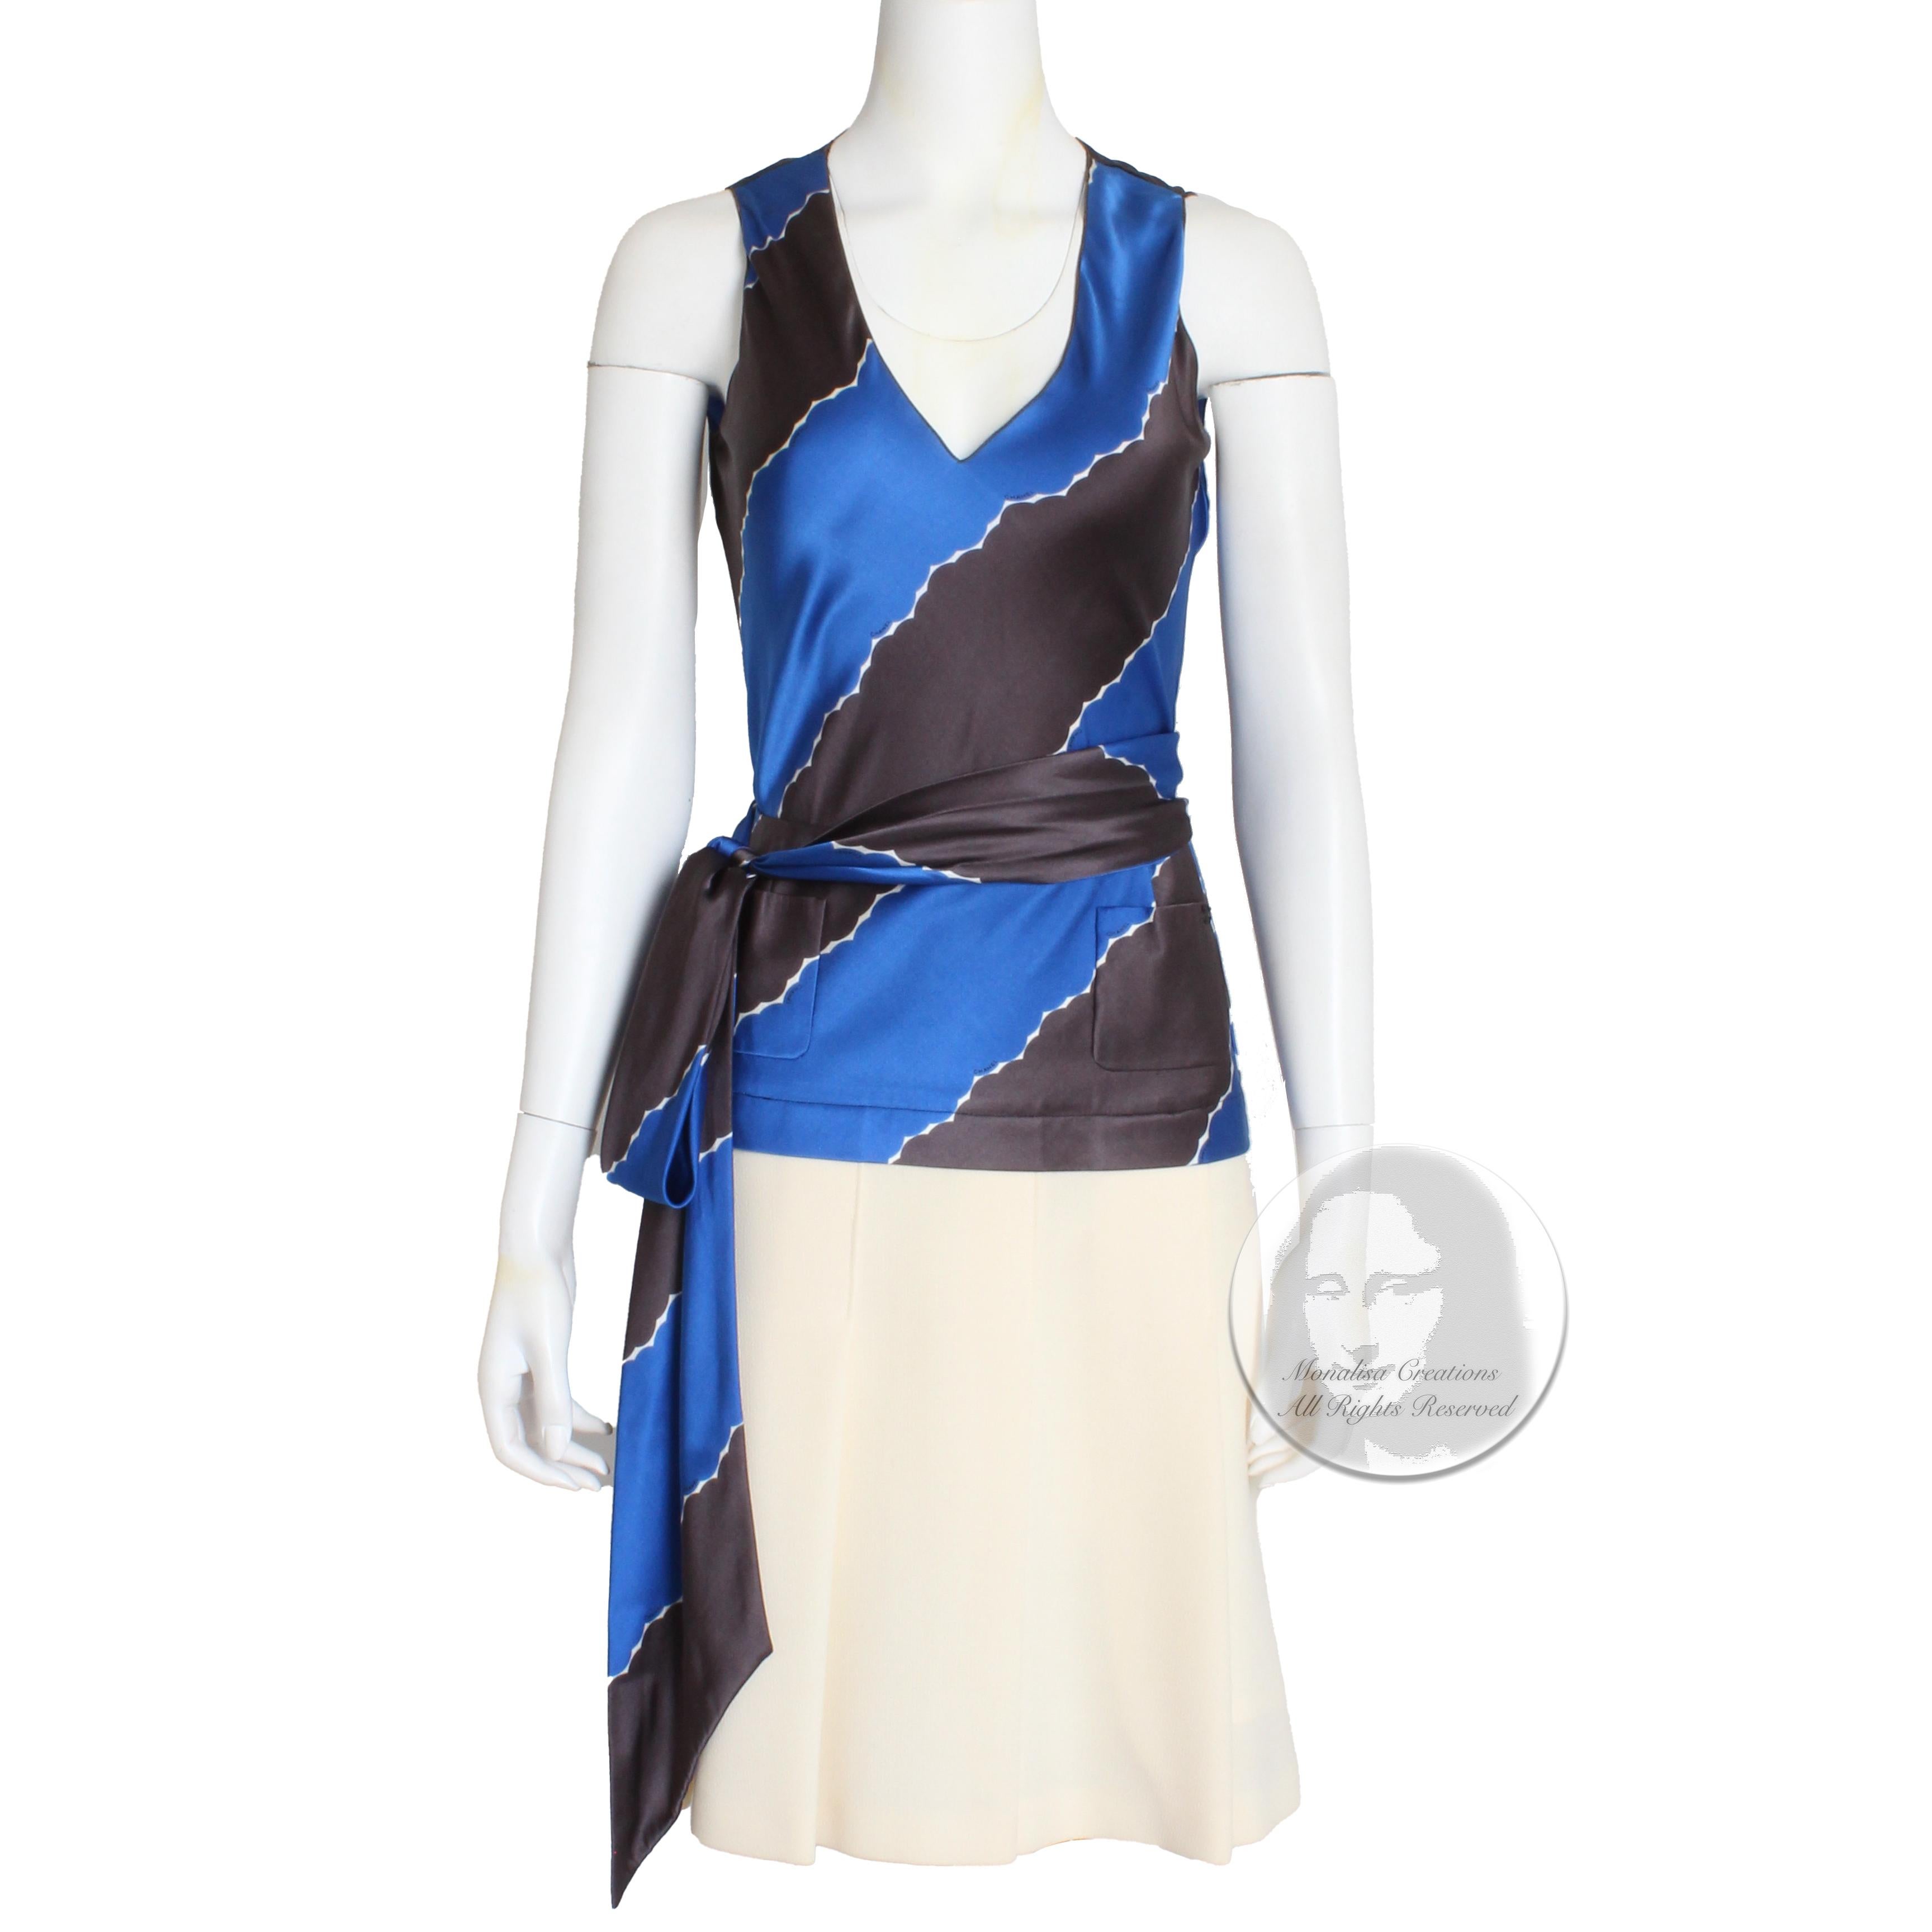 Authentic, preowned Chanel sleeveless top with matching pleated skirt, from the '05C collection.  Made from an abstract print in blue and pebble brown, the top features a v-cut collar and slips over the head.  The skirt is made from matching silk at